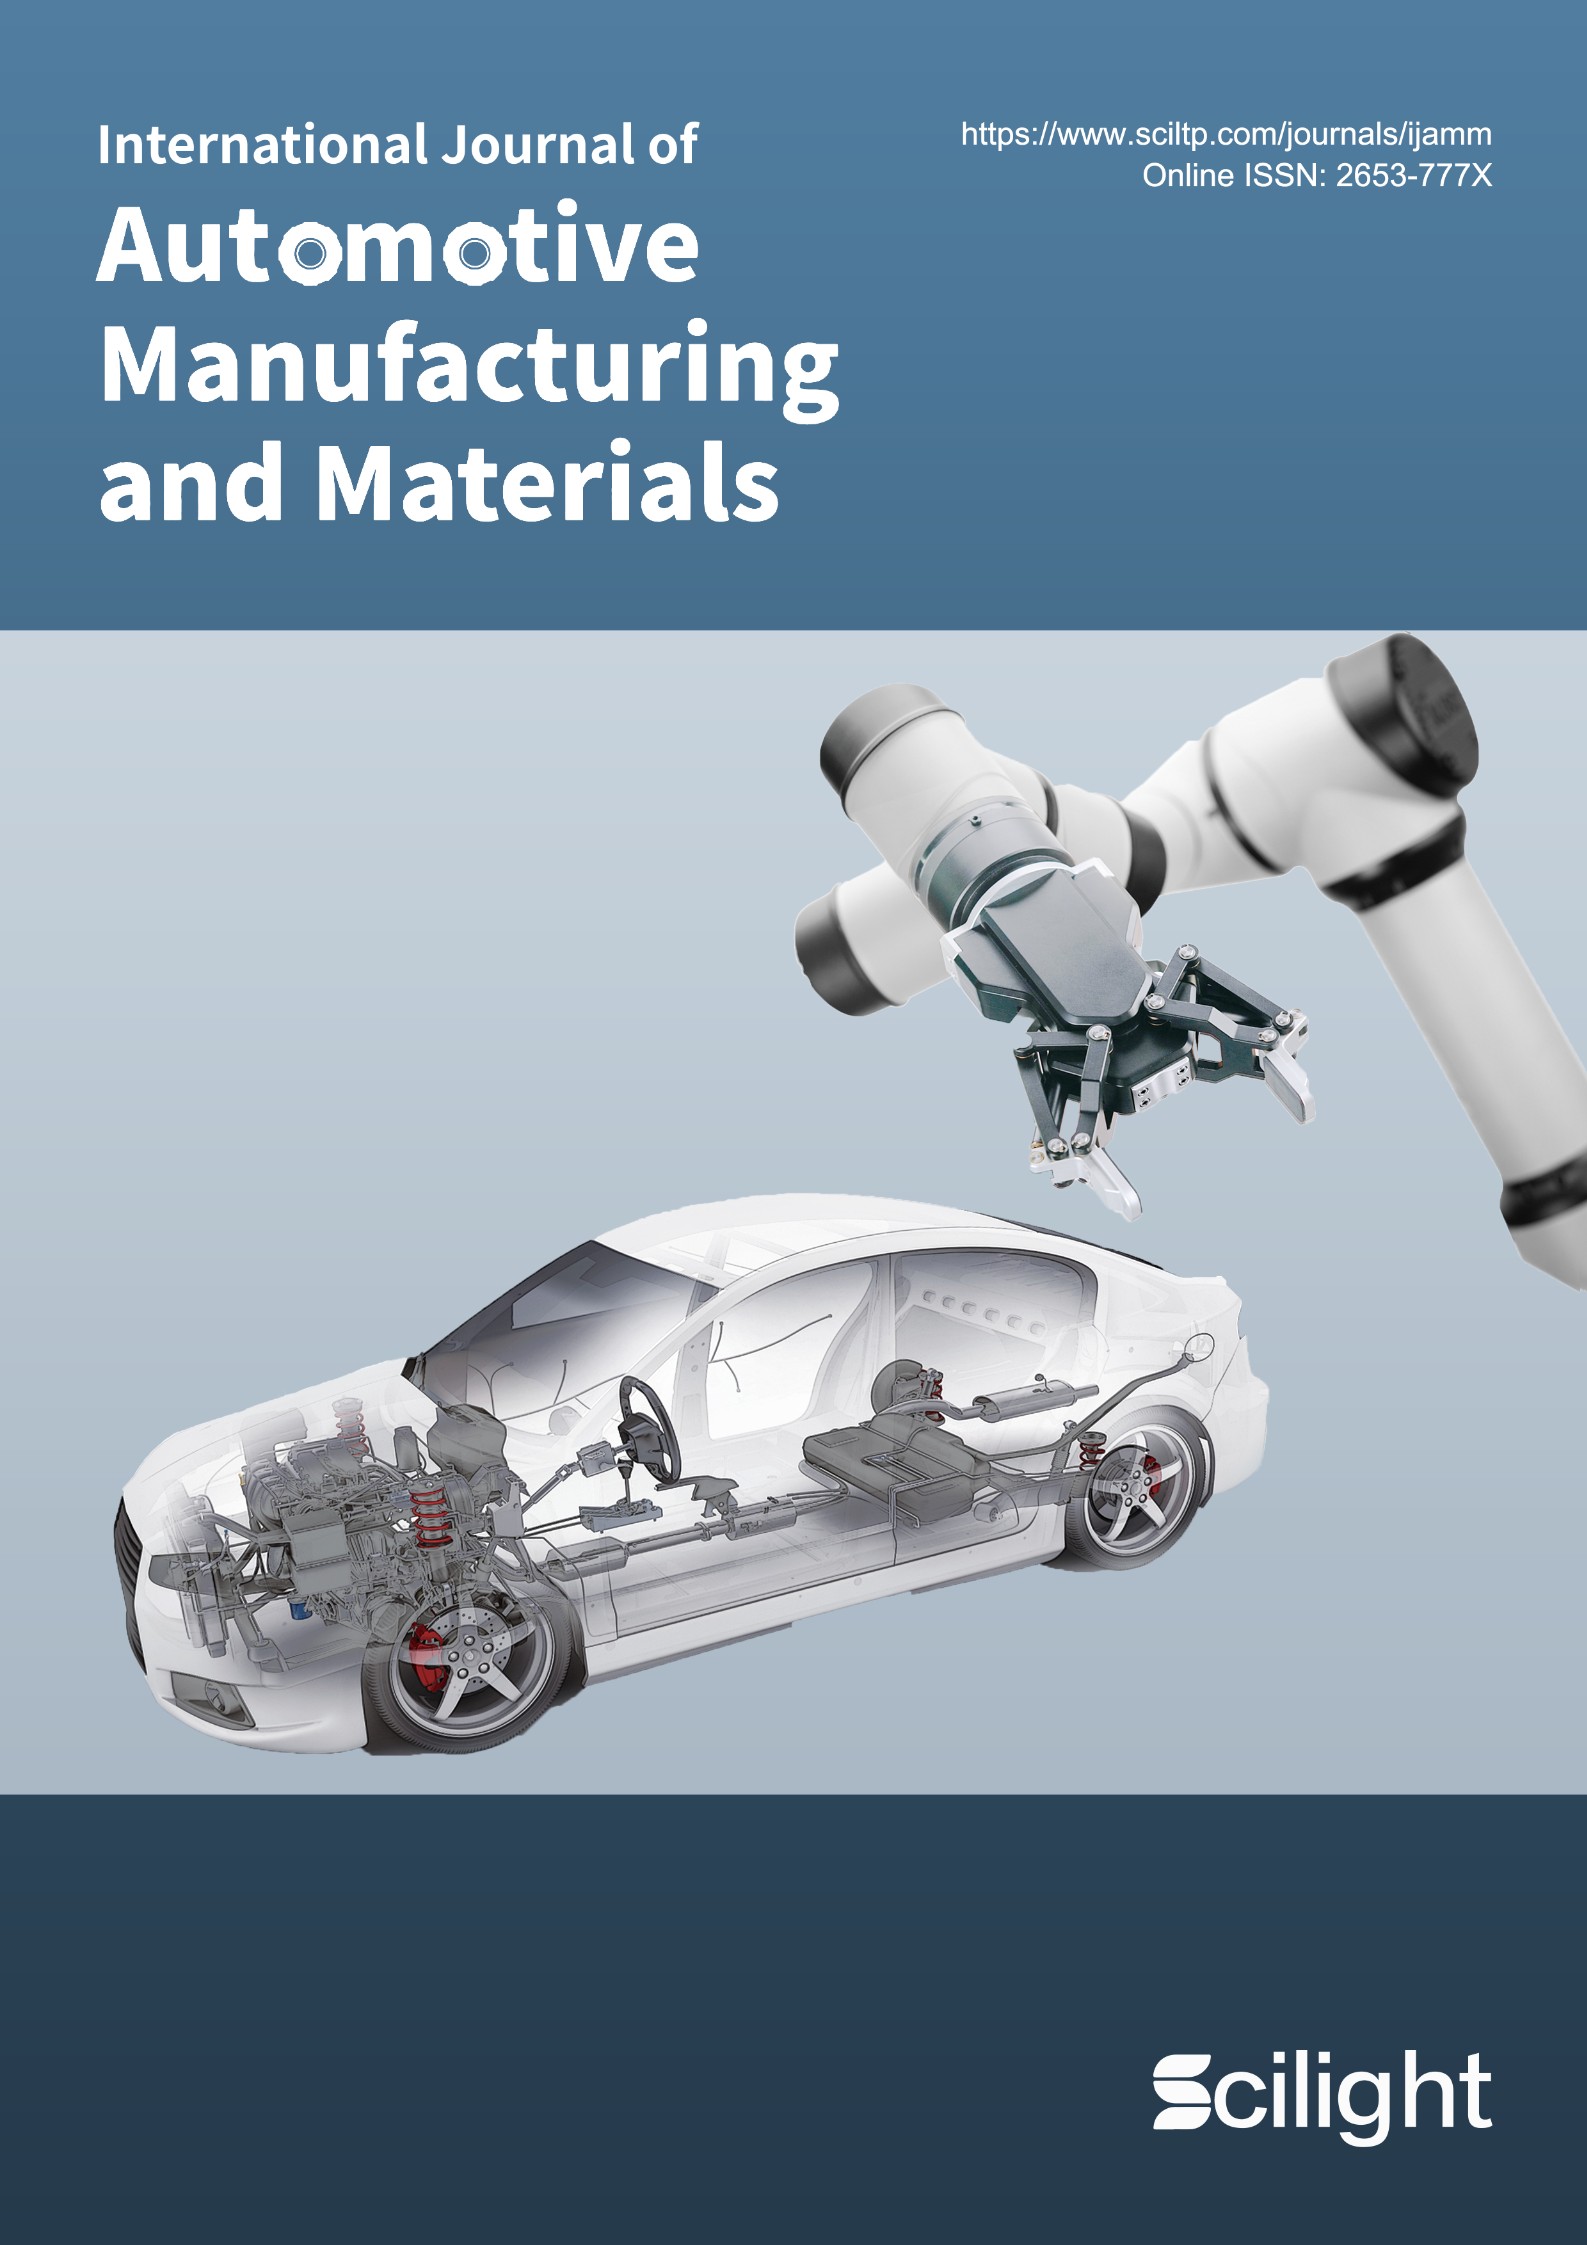 International Journal of Automotive Manufacturing and Materials